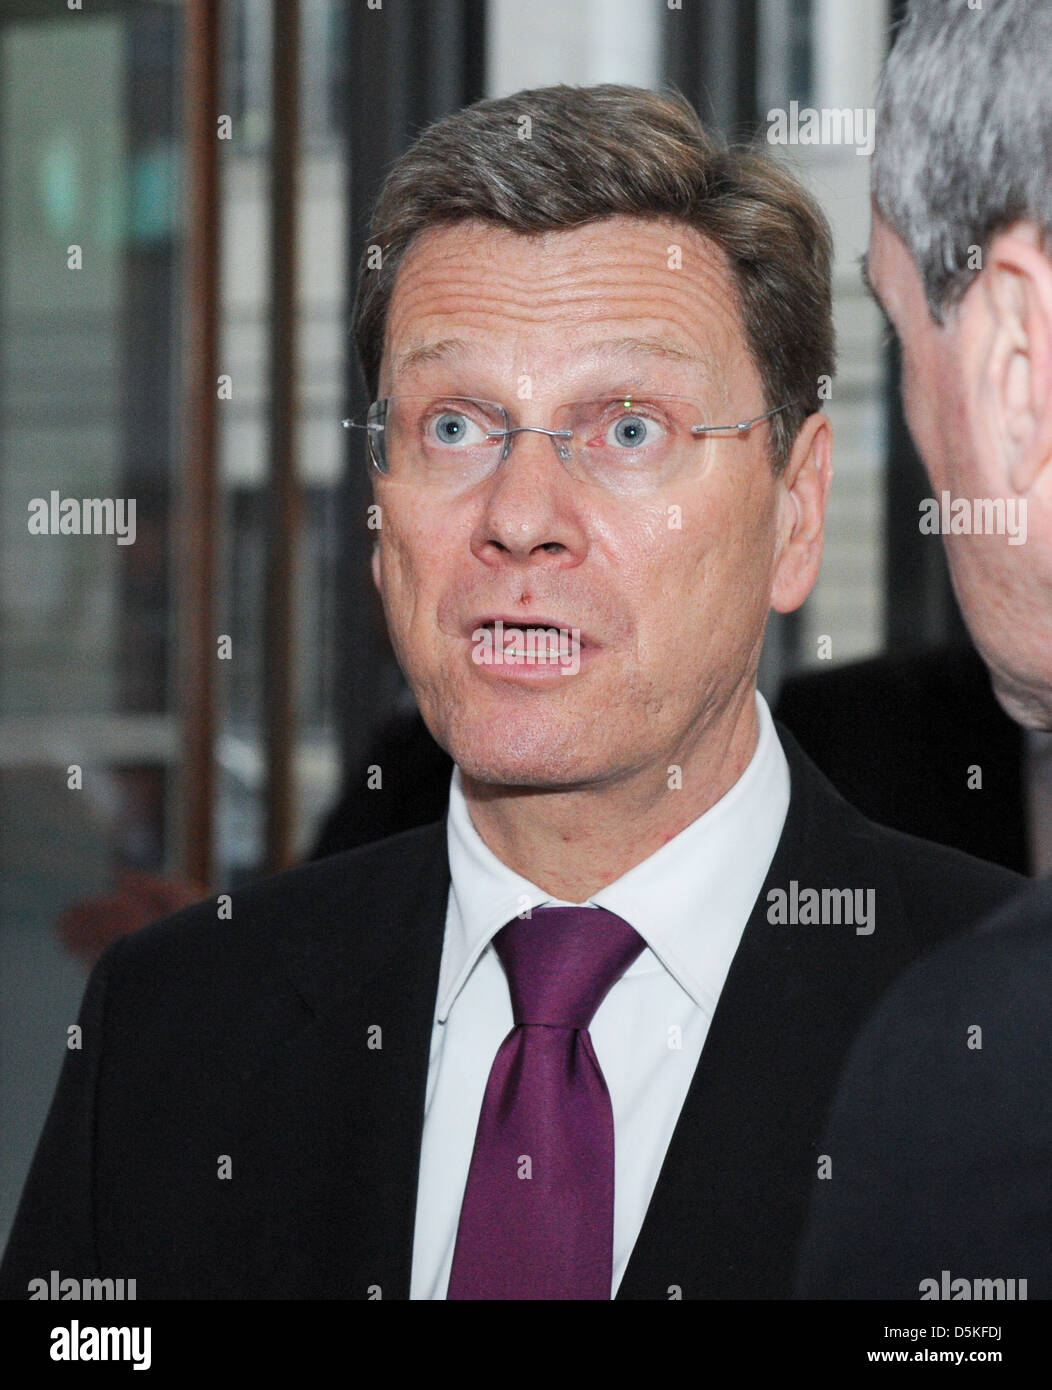 Guido Westerwelle at manager meeting ofgerman telekom at Atrium. Berlin, Germany - 06.04.2011. Stock Photo